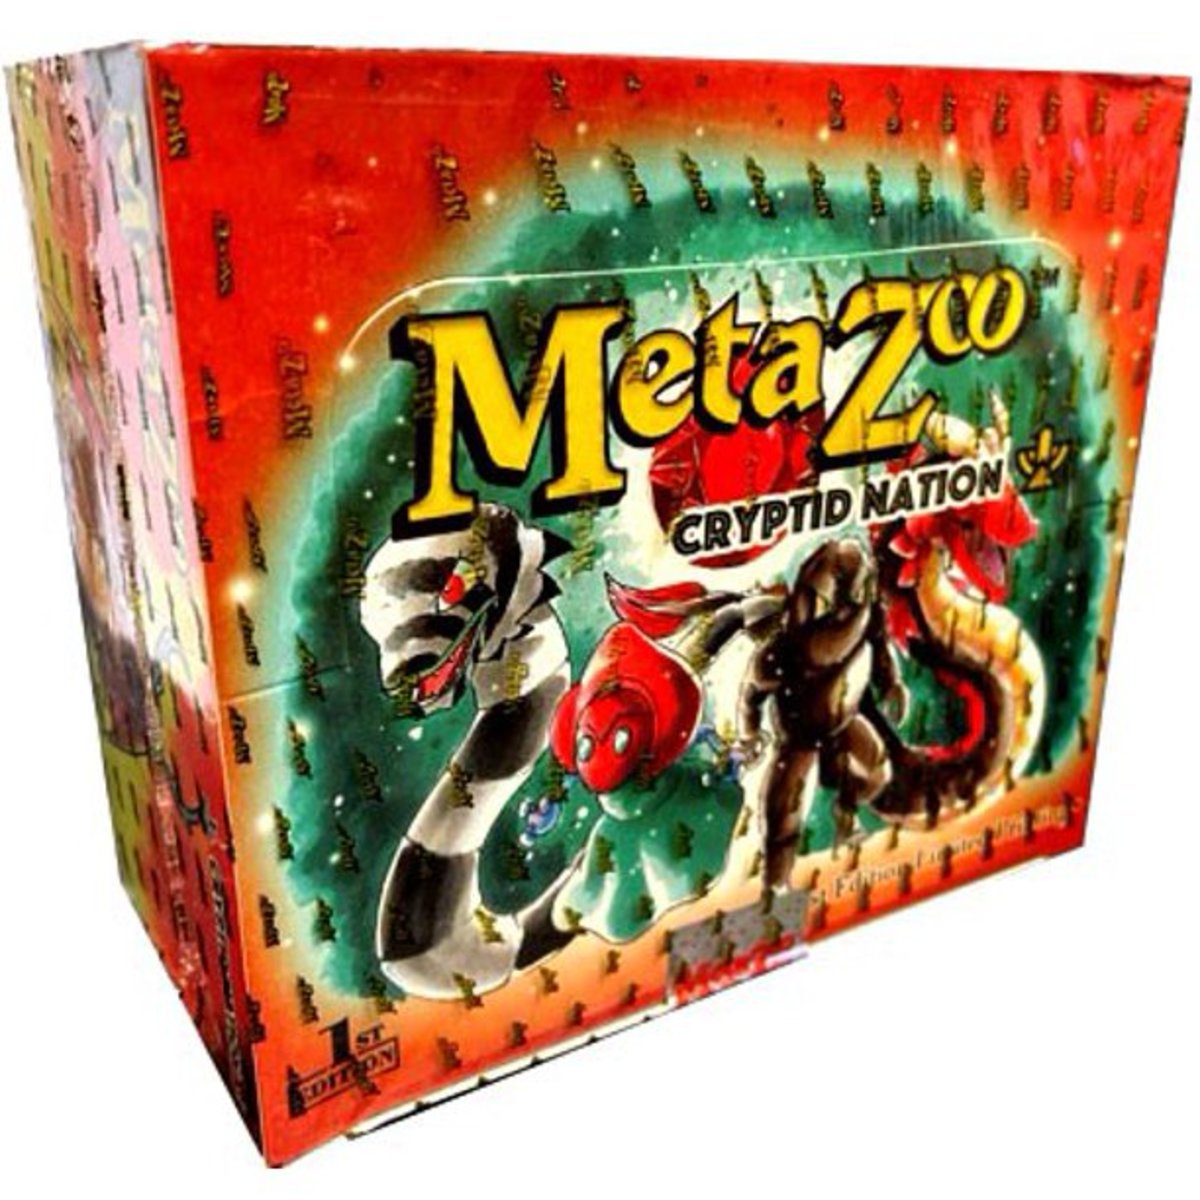 MetaZoo: Cryptid Nation was the first commercially available set of cards released by the property.